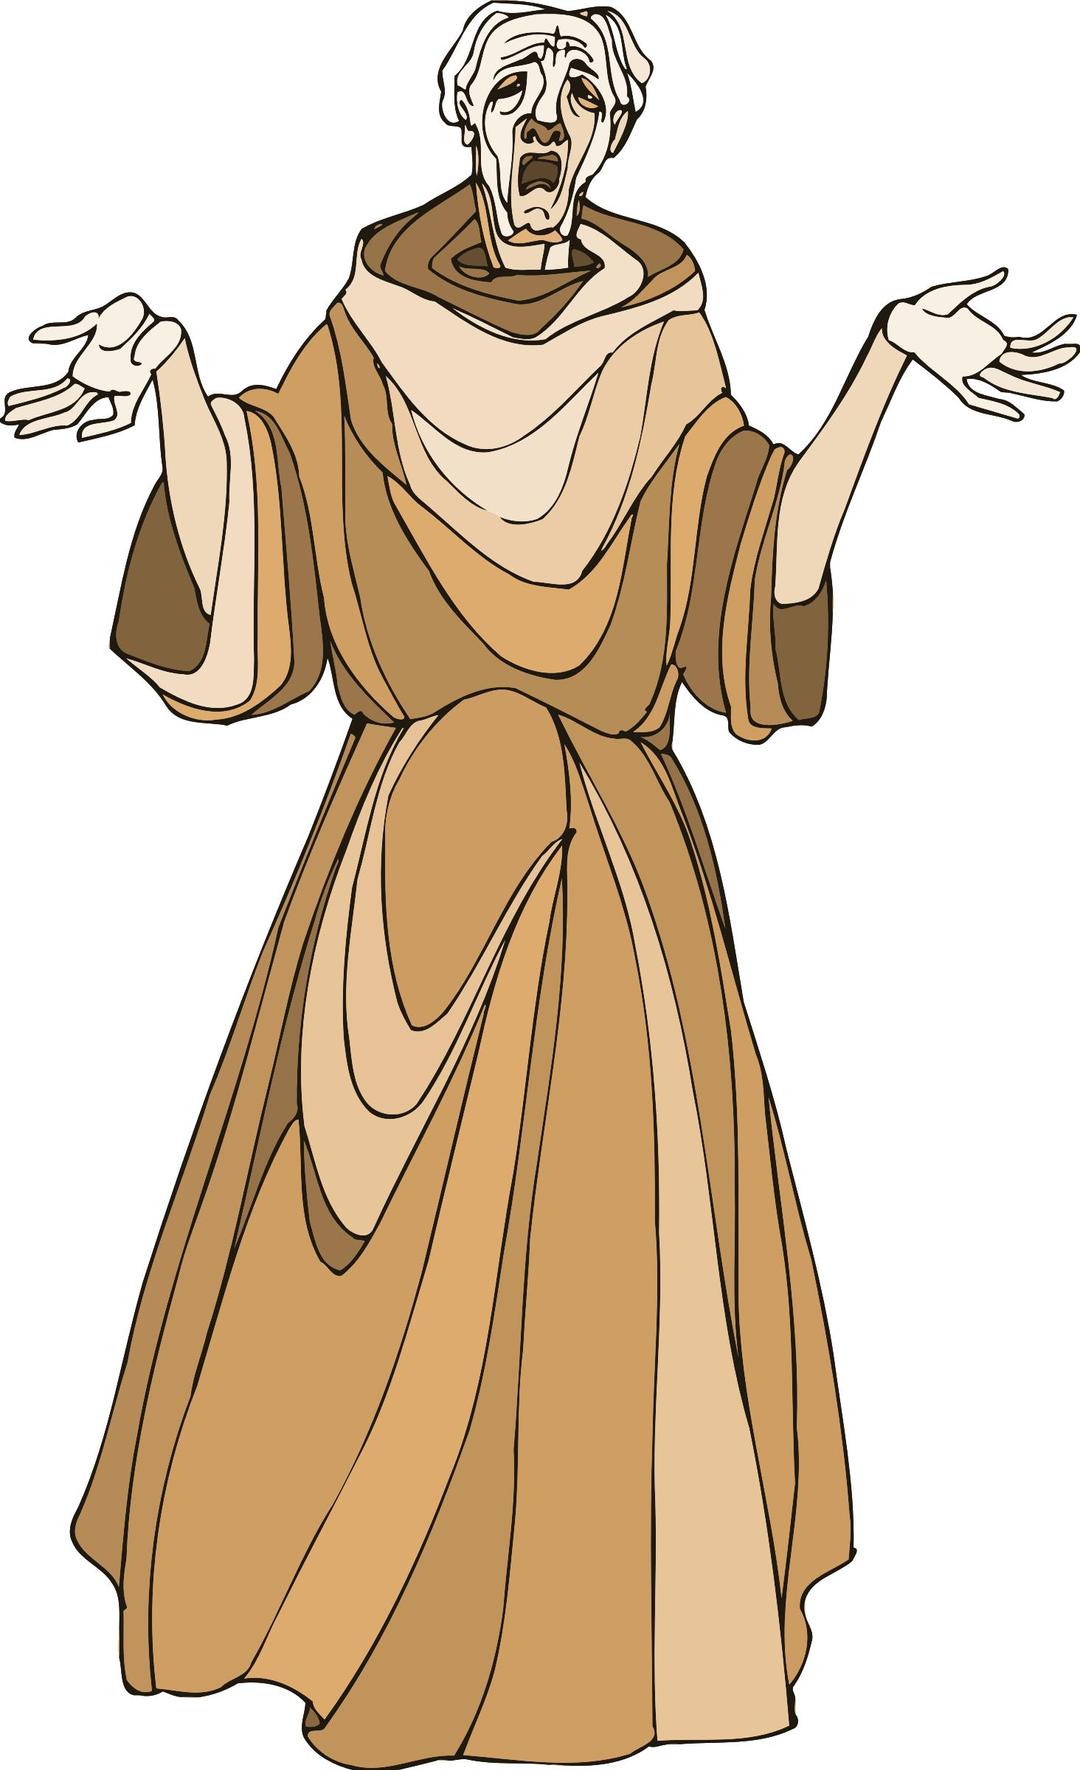 Shakespeare characters - monk png transparent